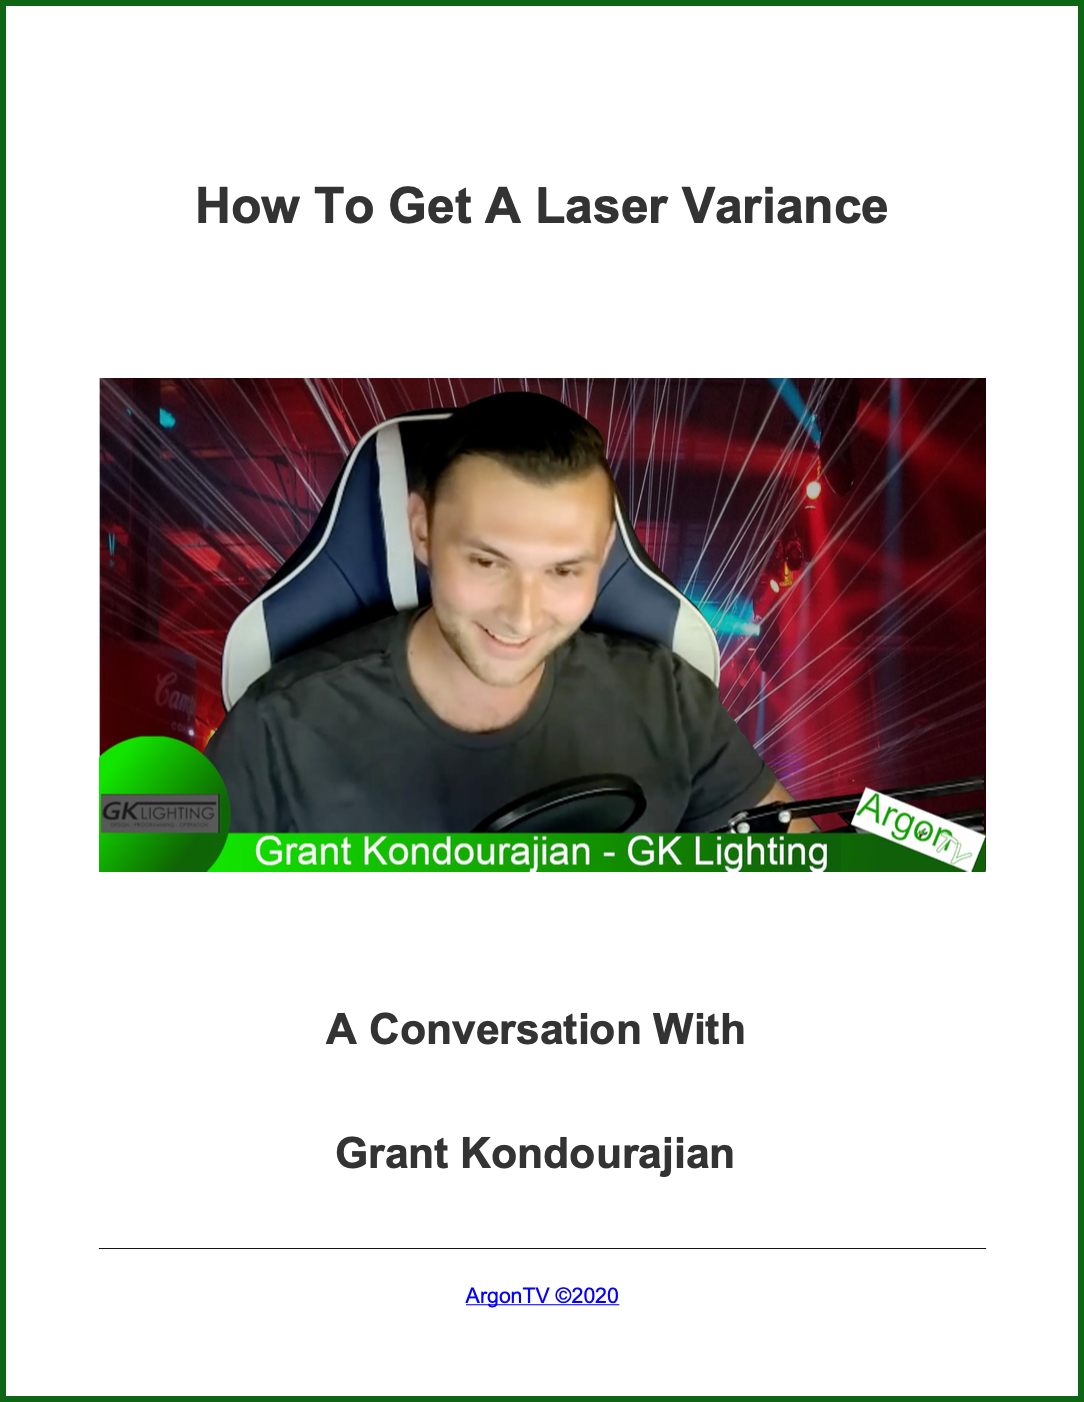 How To Get A Laser Variance Cover Page - With ArgonTV